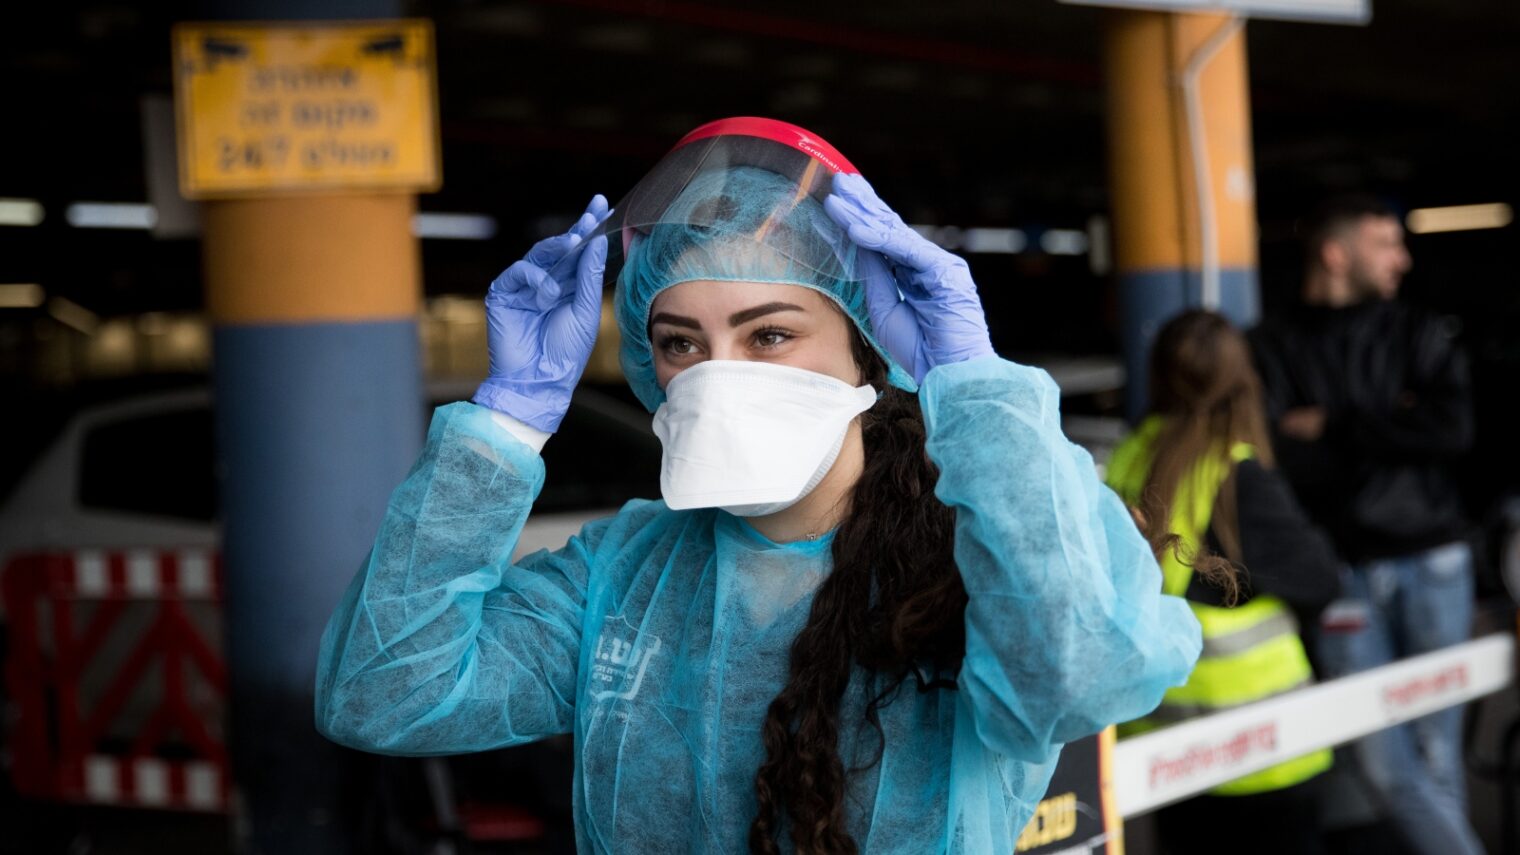 Hospital staff at Shaare Zedek Medical Center in Jerusalem donned facemasks and protective clothing to prepare for the arrival of a Chinese woman suspected of having coronavirus infection, January 27, 2020. Photo by Yonatan Sindel/Flash90